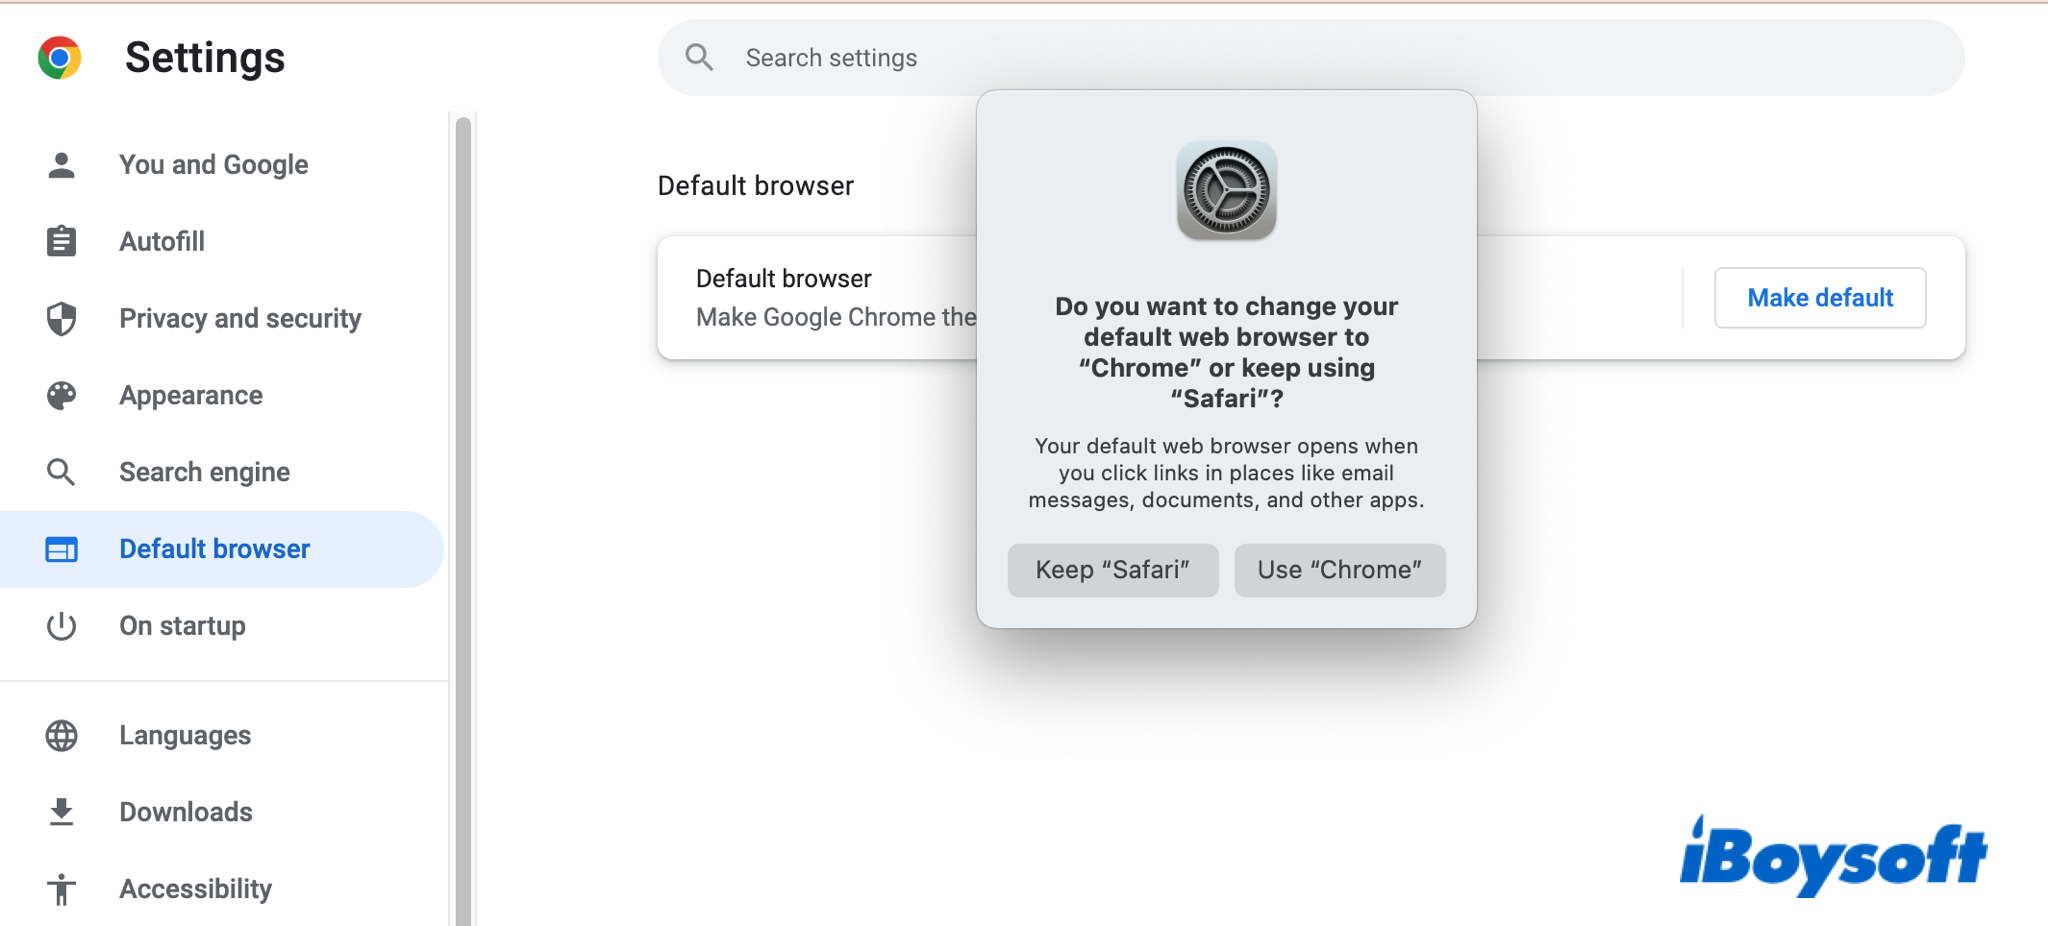 confirm to change default browser